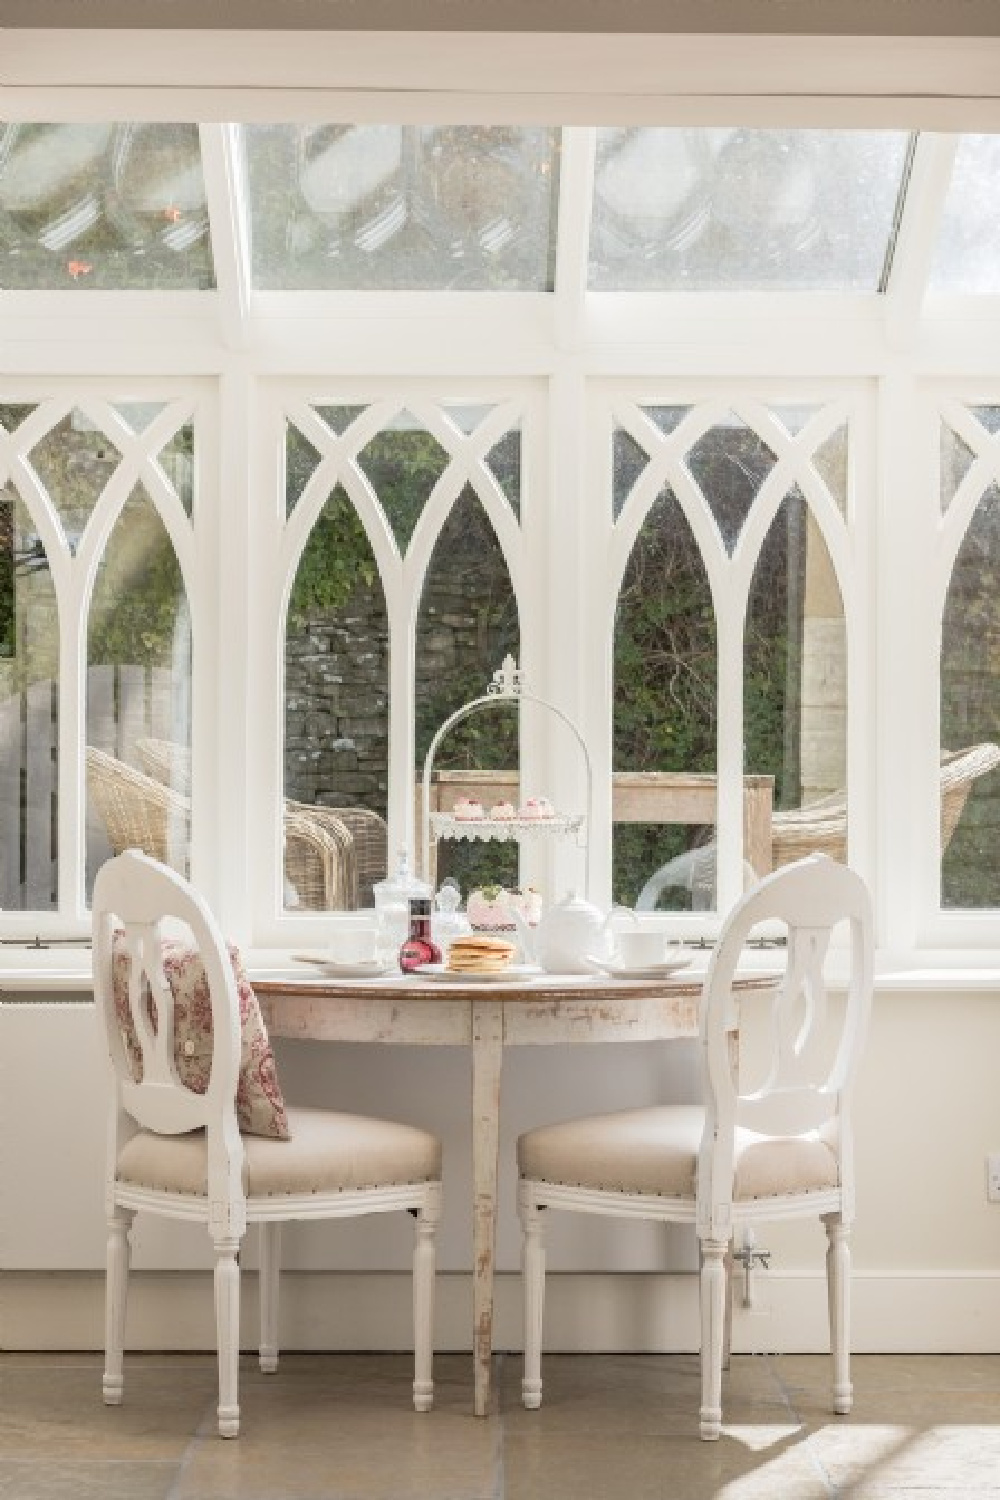 Breathtaking architecture on kitchen window with demilune dining table - Flower Press holiday rental Biburg Cotswolds. #cotswoldscottage #englishcountry #cottageinteriors